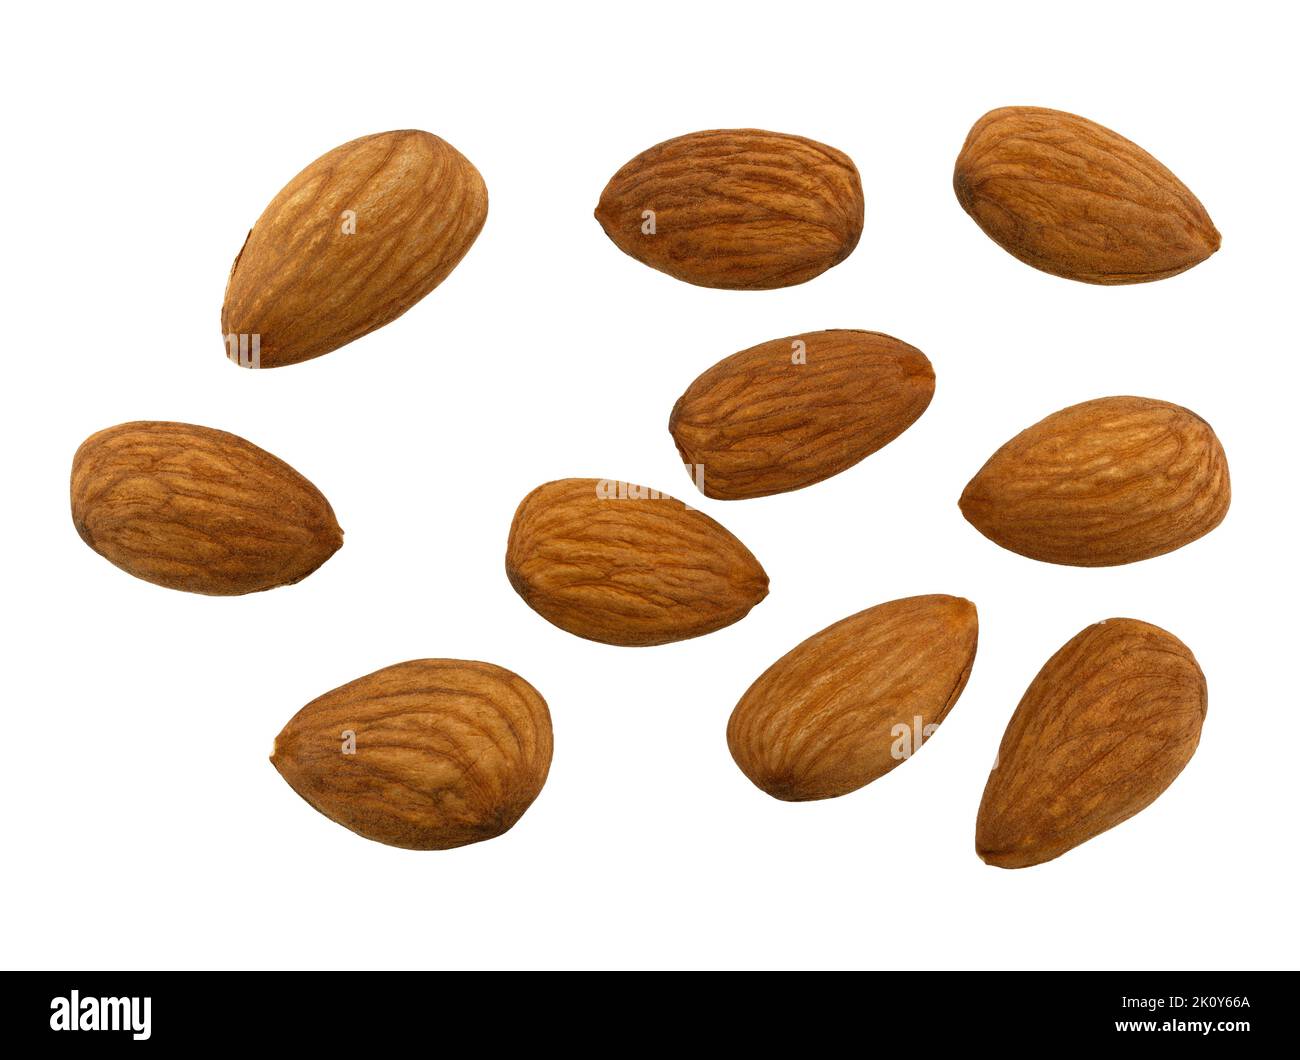 Overhead view of a medium group of almond nuts isolated on a white background. Stock Photo